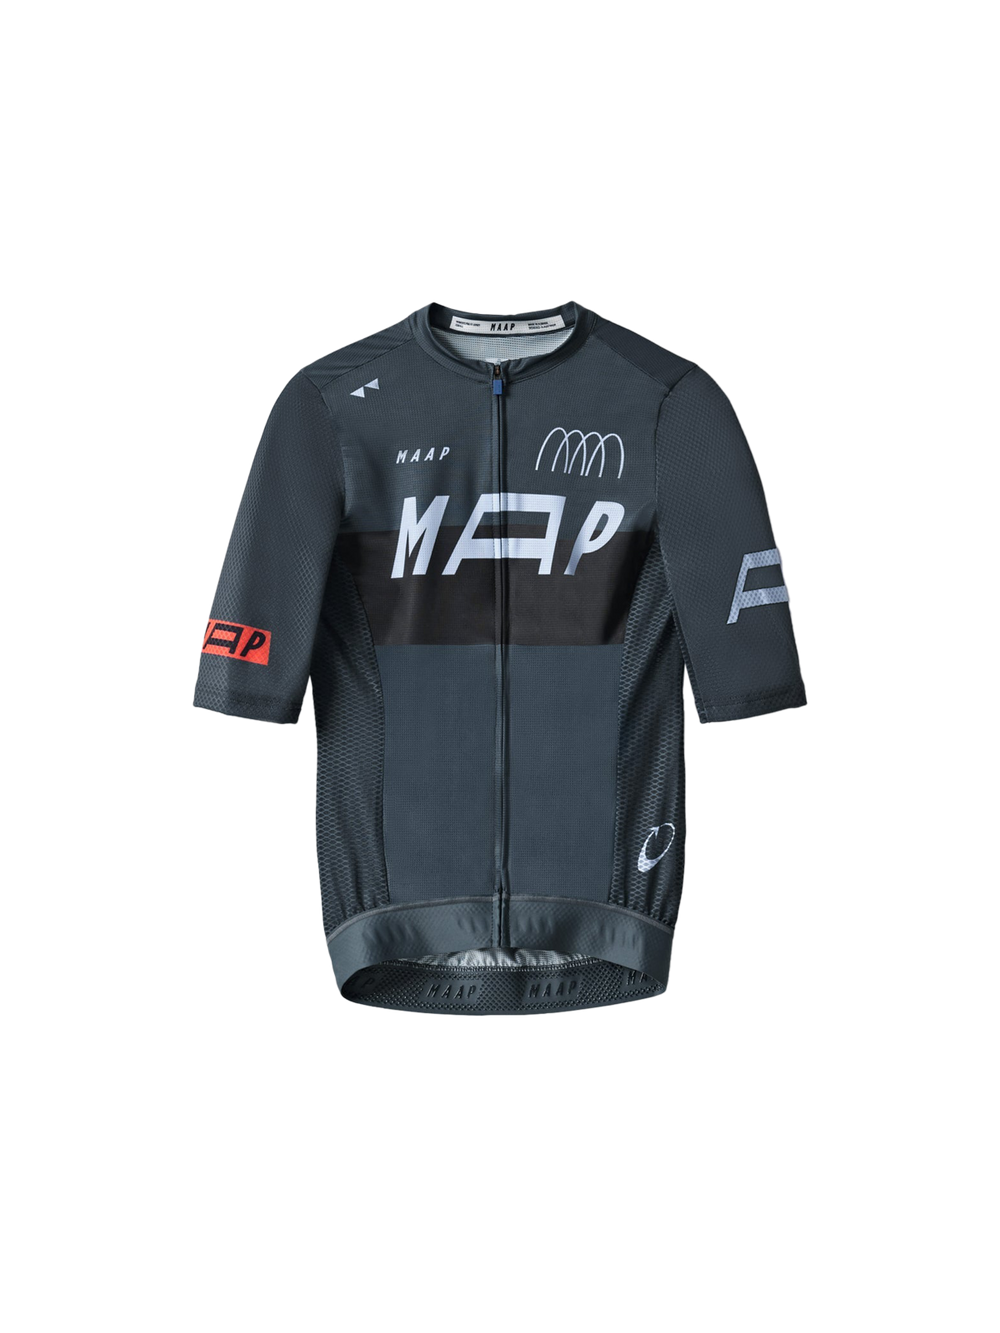 Product Image for Women's Adapt Pro Air Jersey